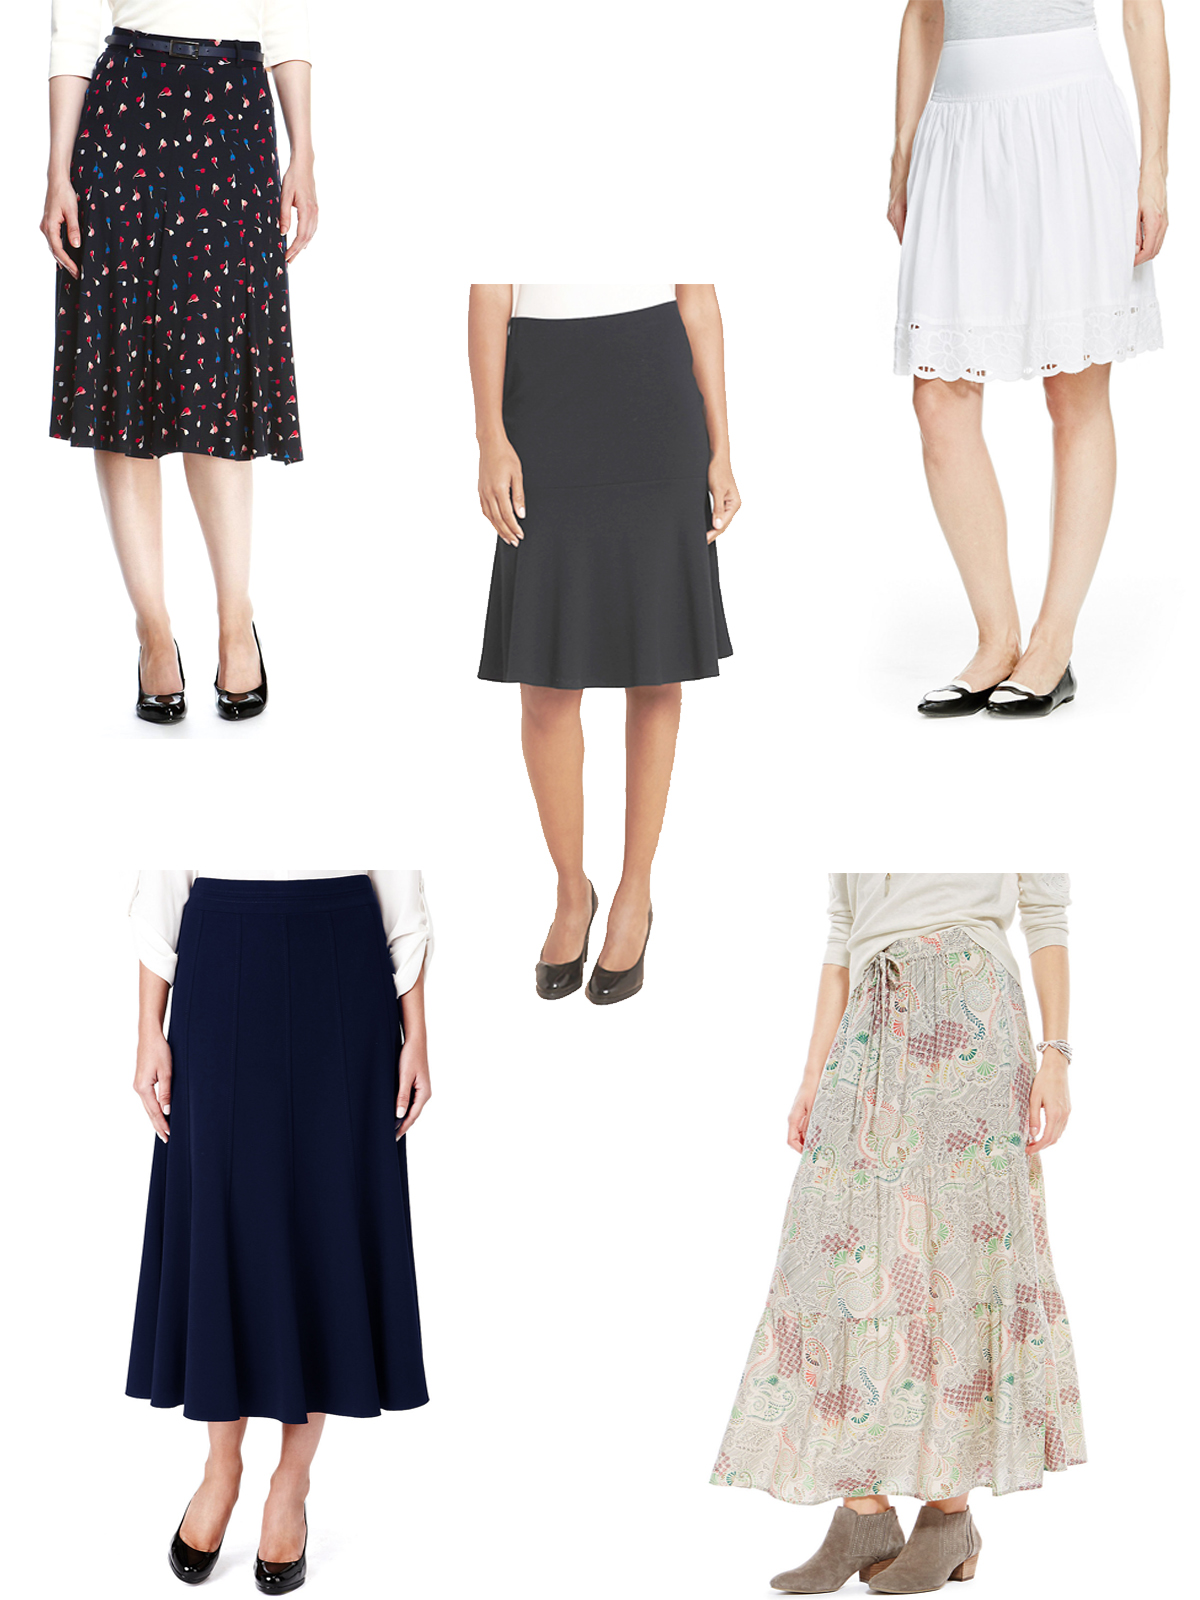 Marks and Spencer - - M&5 ASSORTED Ladies Skirts - Size 10 to 16